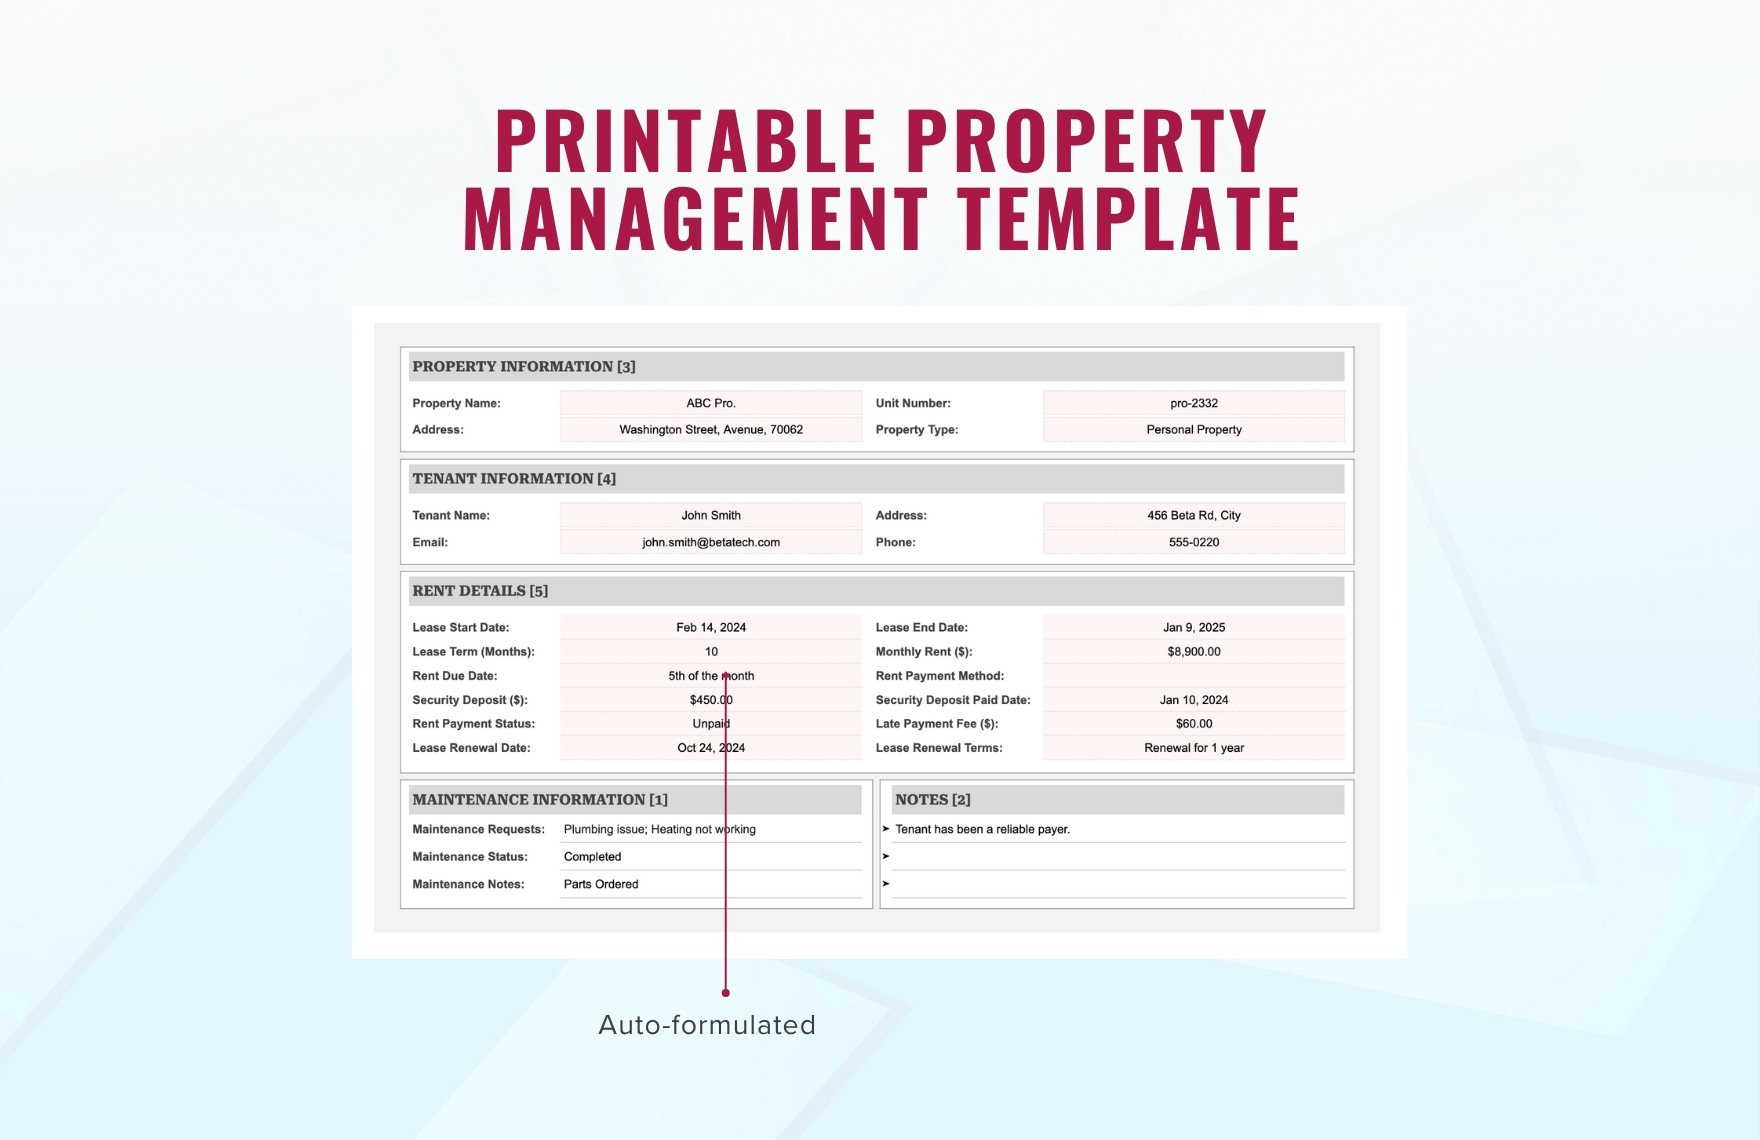 Printable Property Management Template